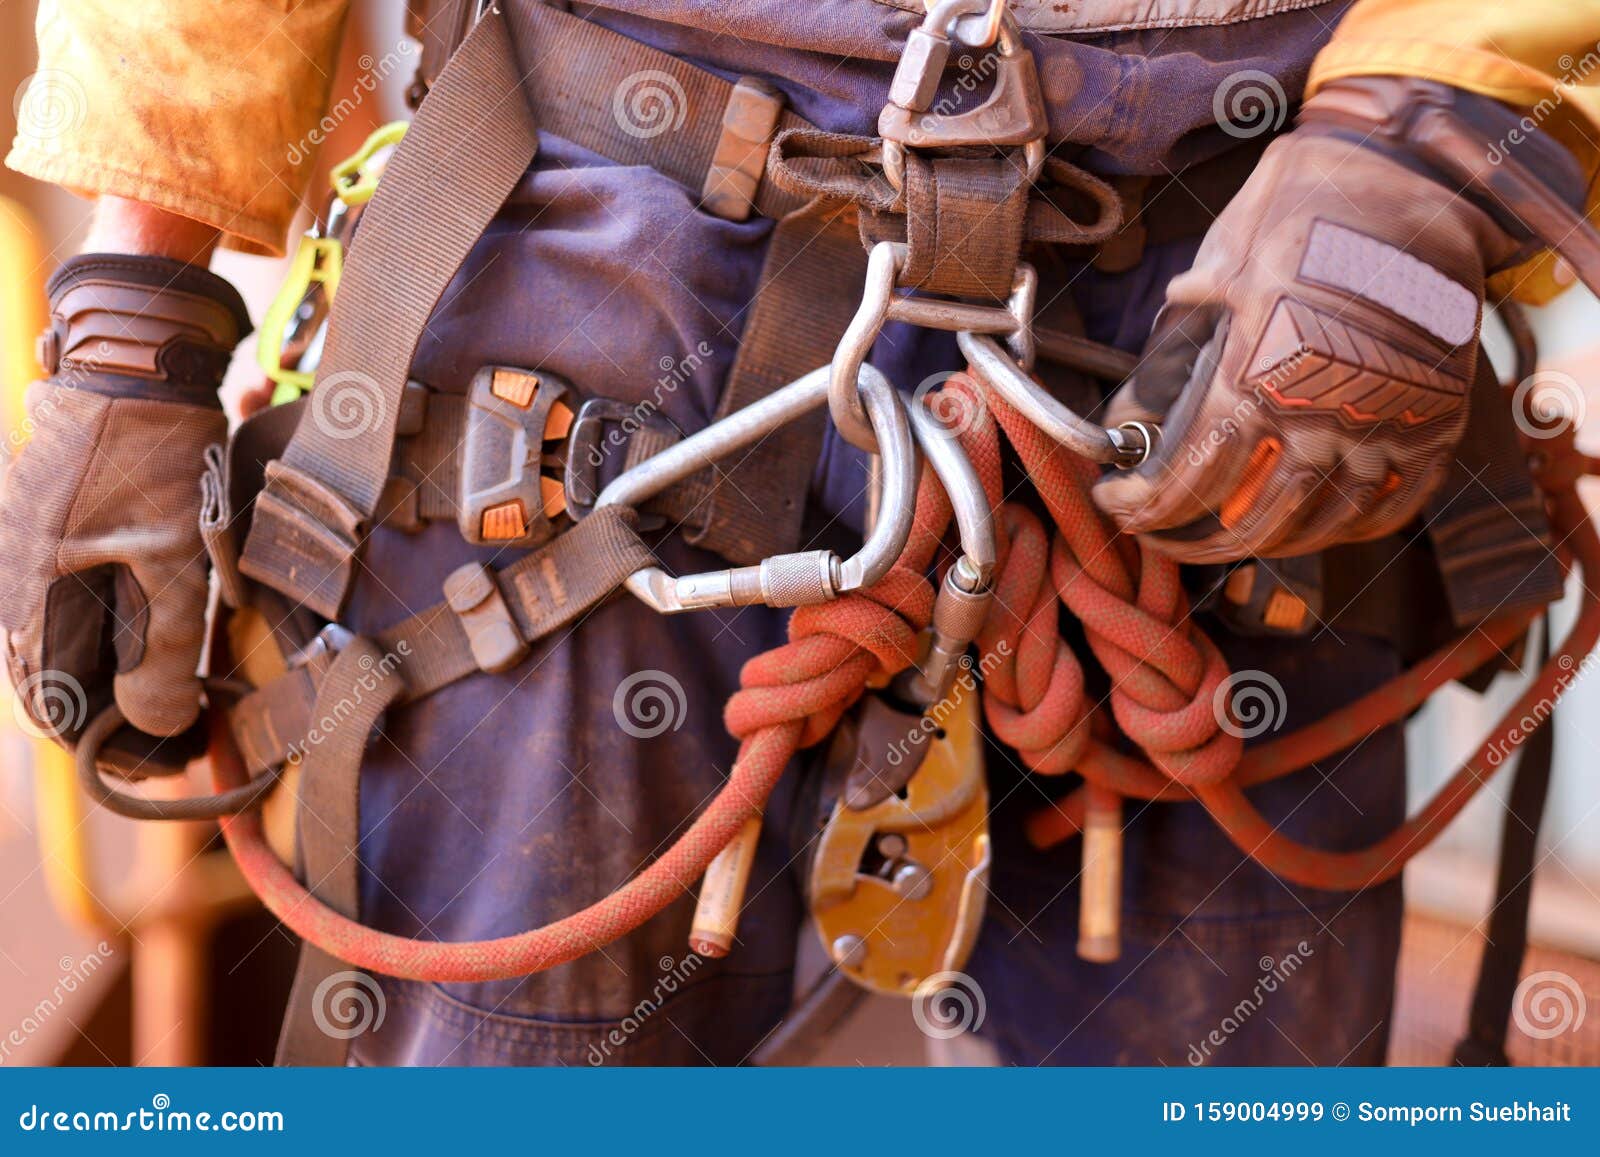 rope access worker wearing full safety harness inspecting clocking karabiner on a chair prior to abseiling